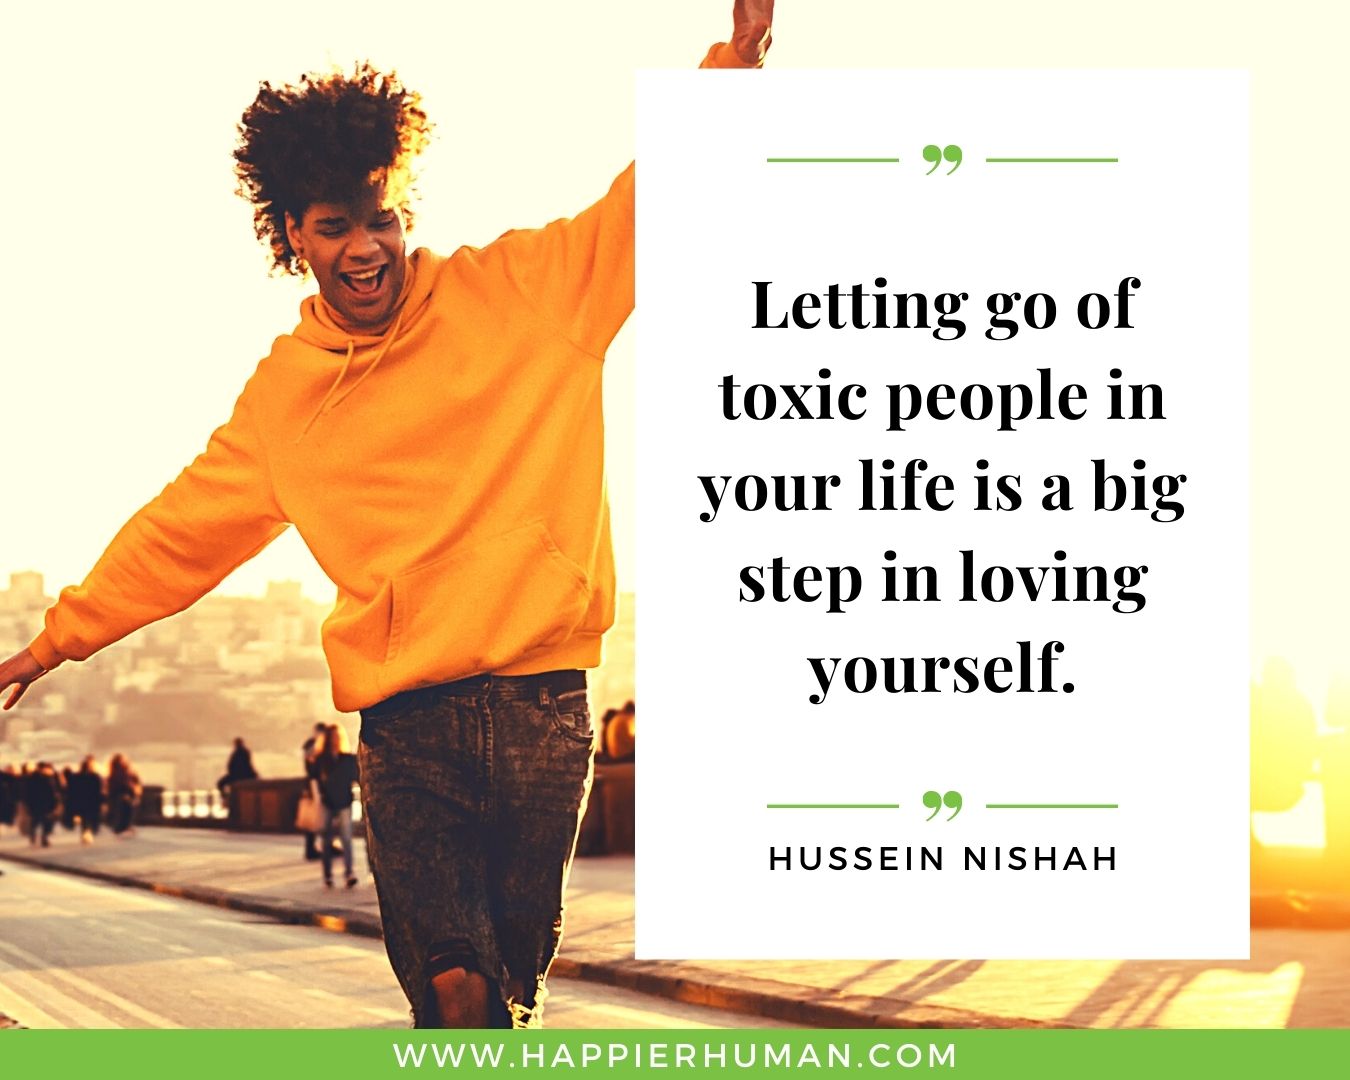 Toxic People Quotes - “Letting go of toxic people in your life is a big step in loving yourself.” – Hussein Nishah